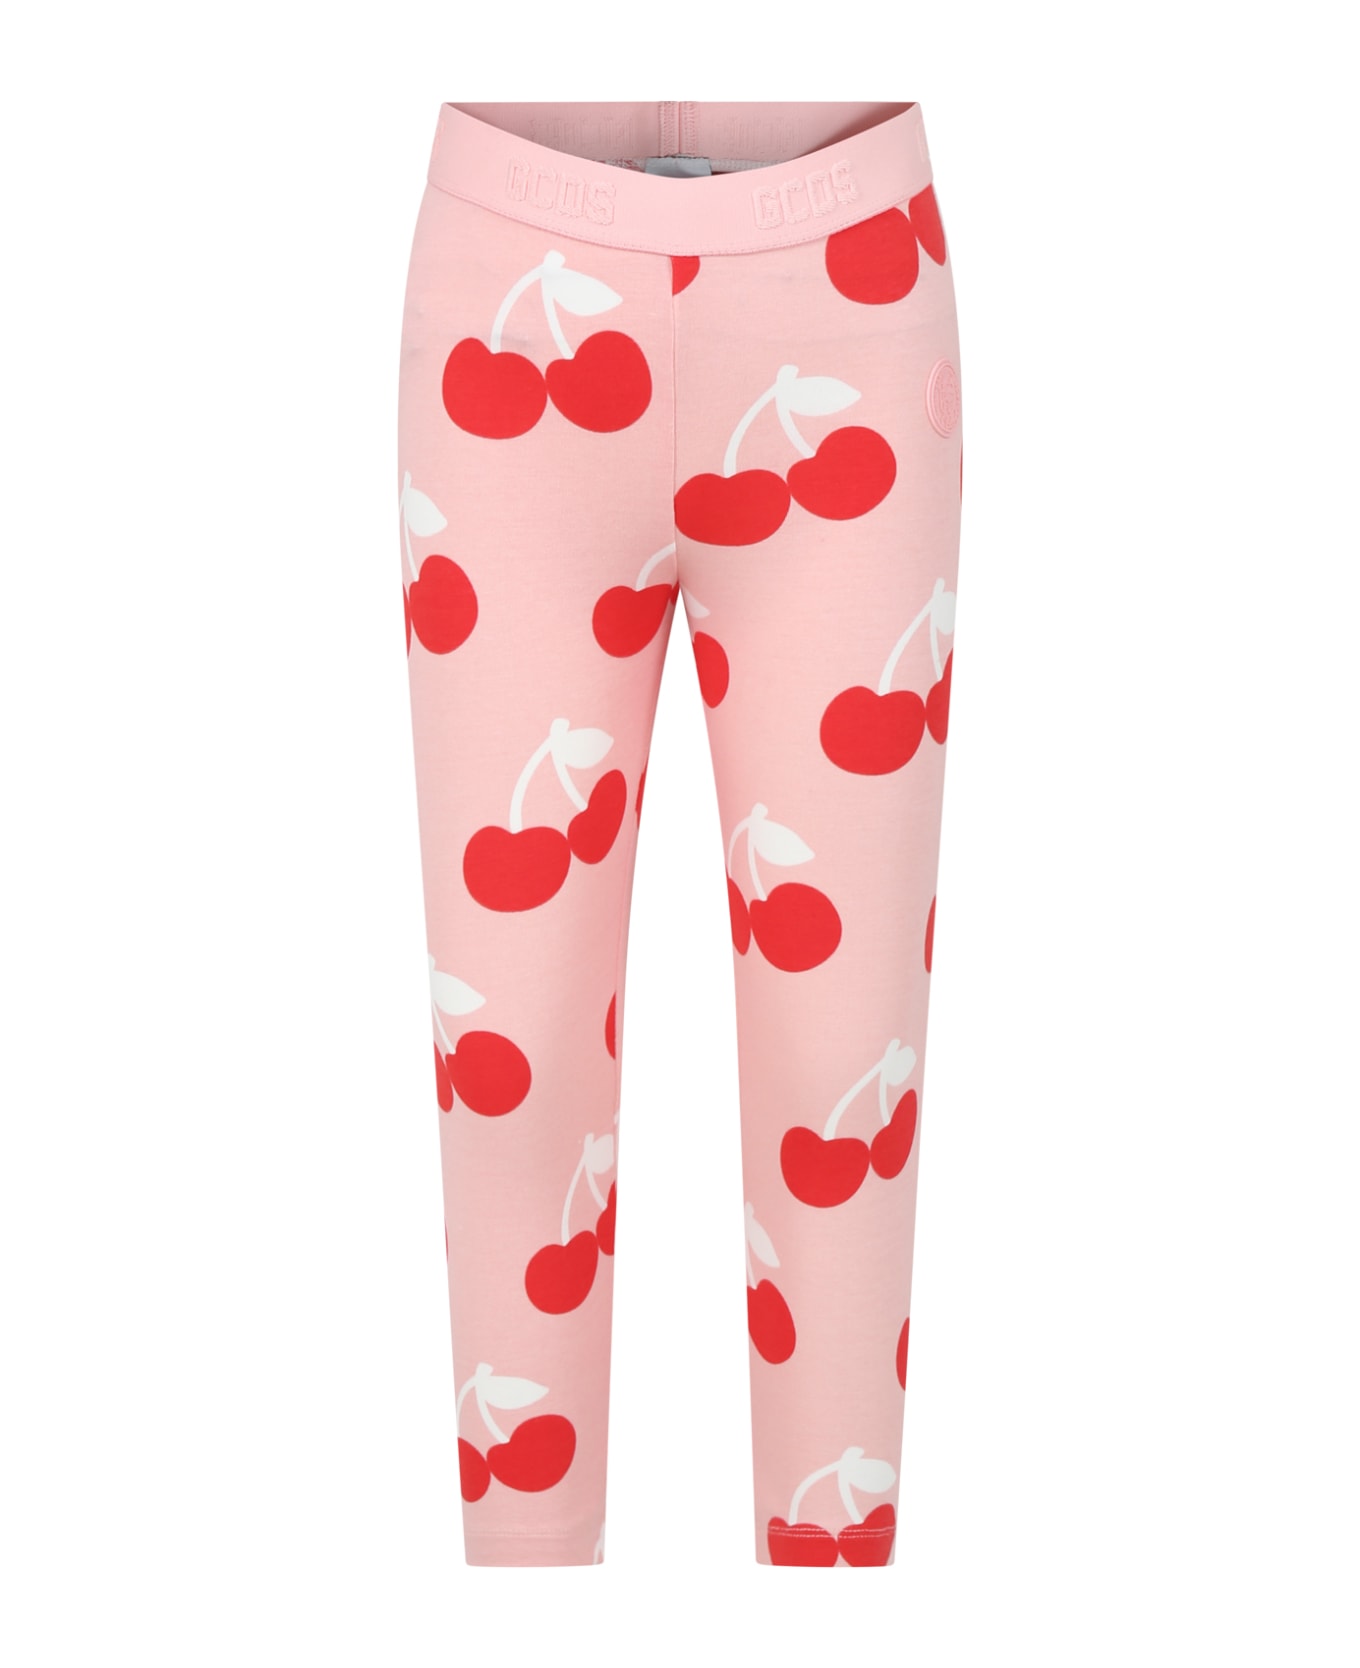 GCDS Mini Pink Leggings For Girl With Cherries - Pink